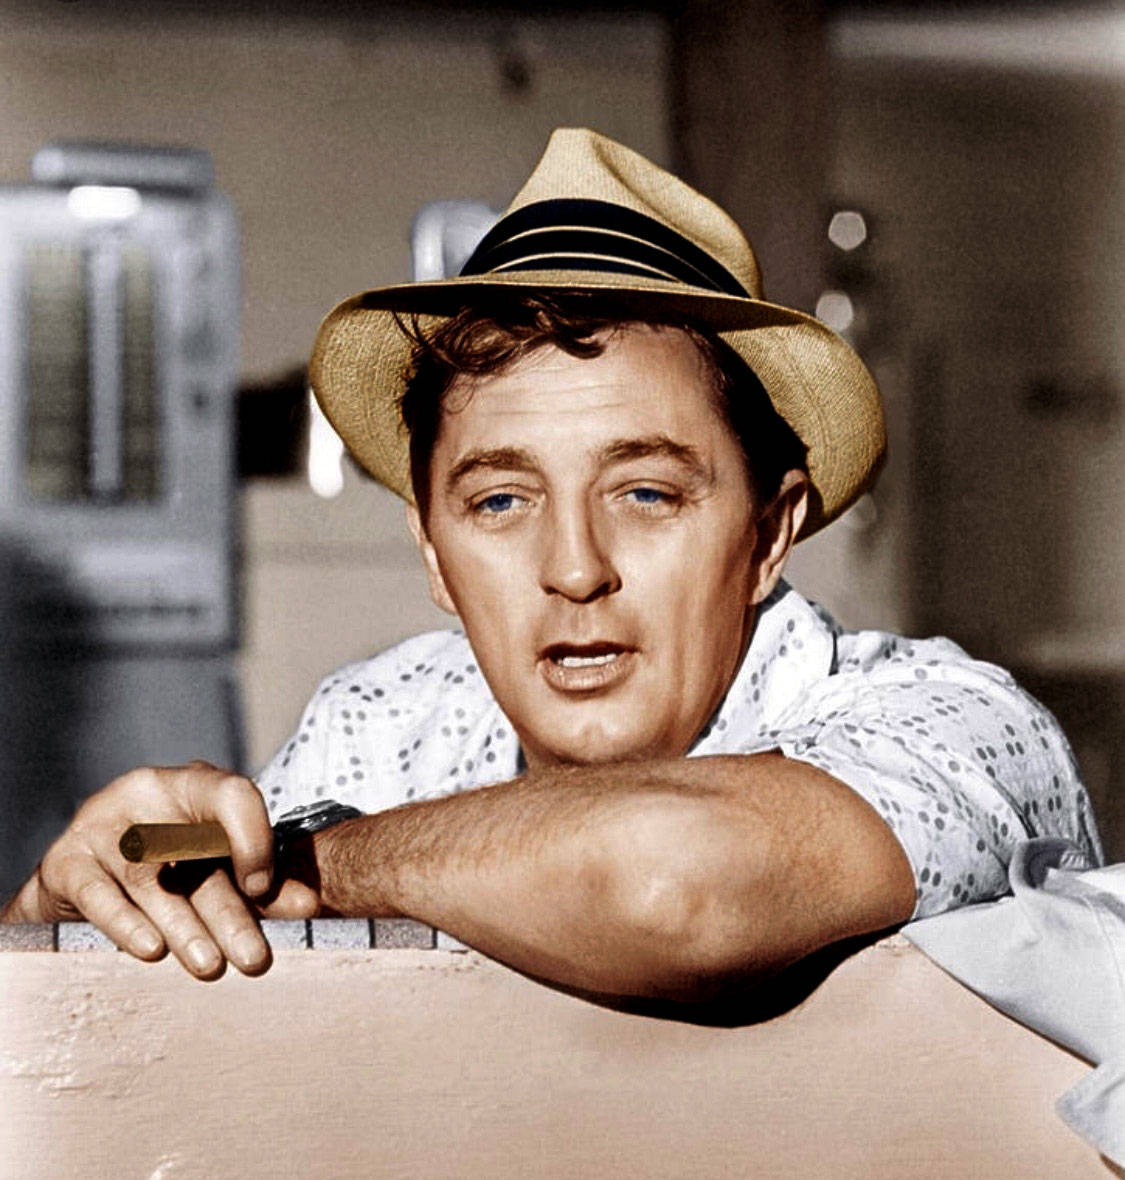 Robert Mitchum Colored Shot With Cigar (scatto A Colori Di Robert Mitchum Con Sigaro) Sfondo